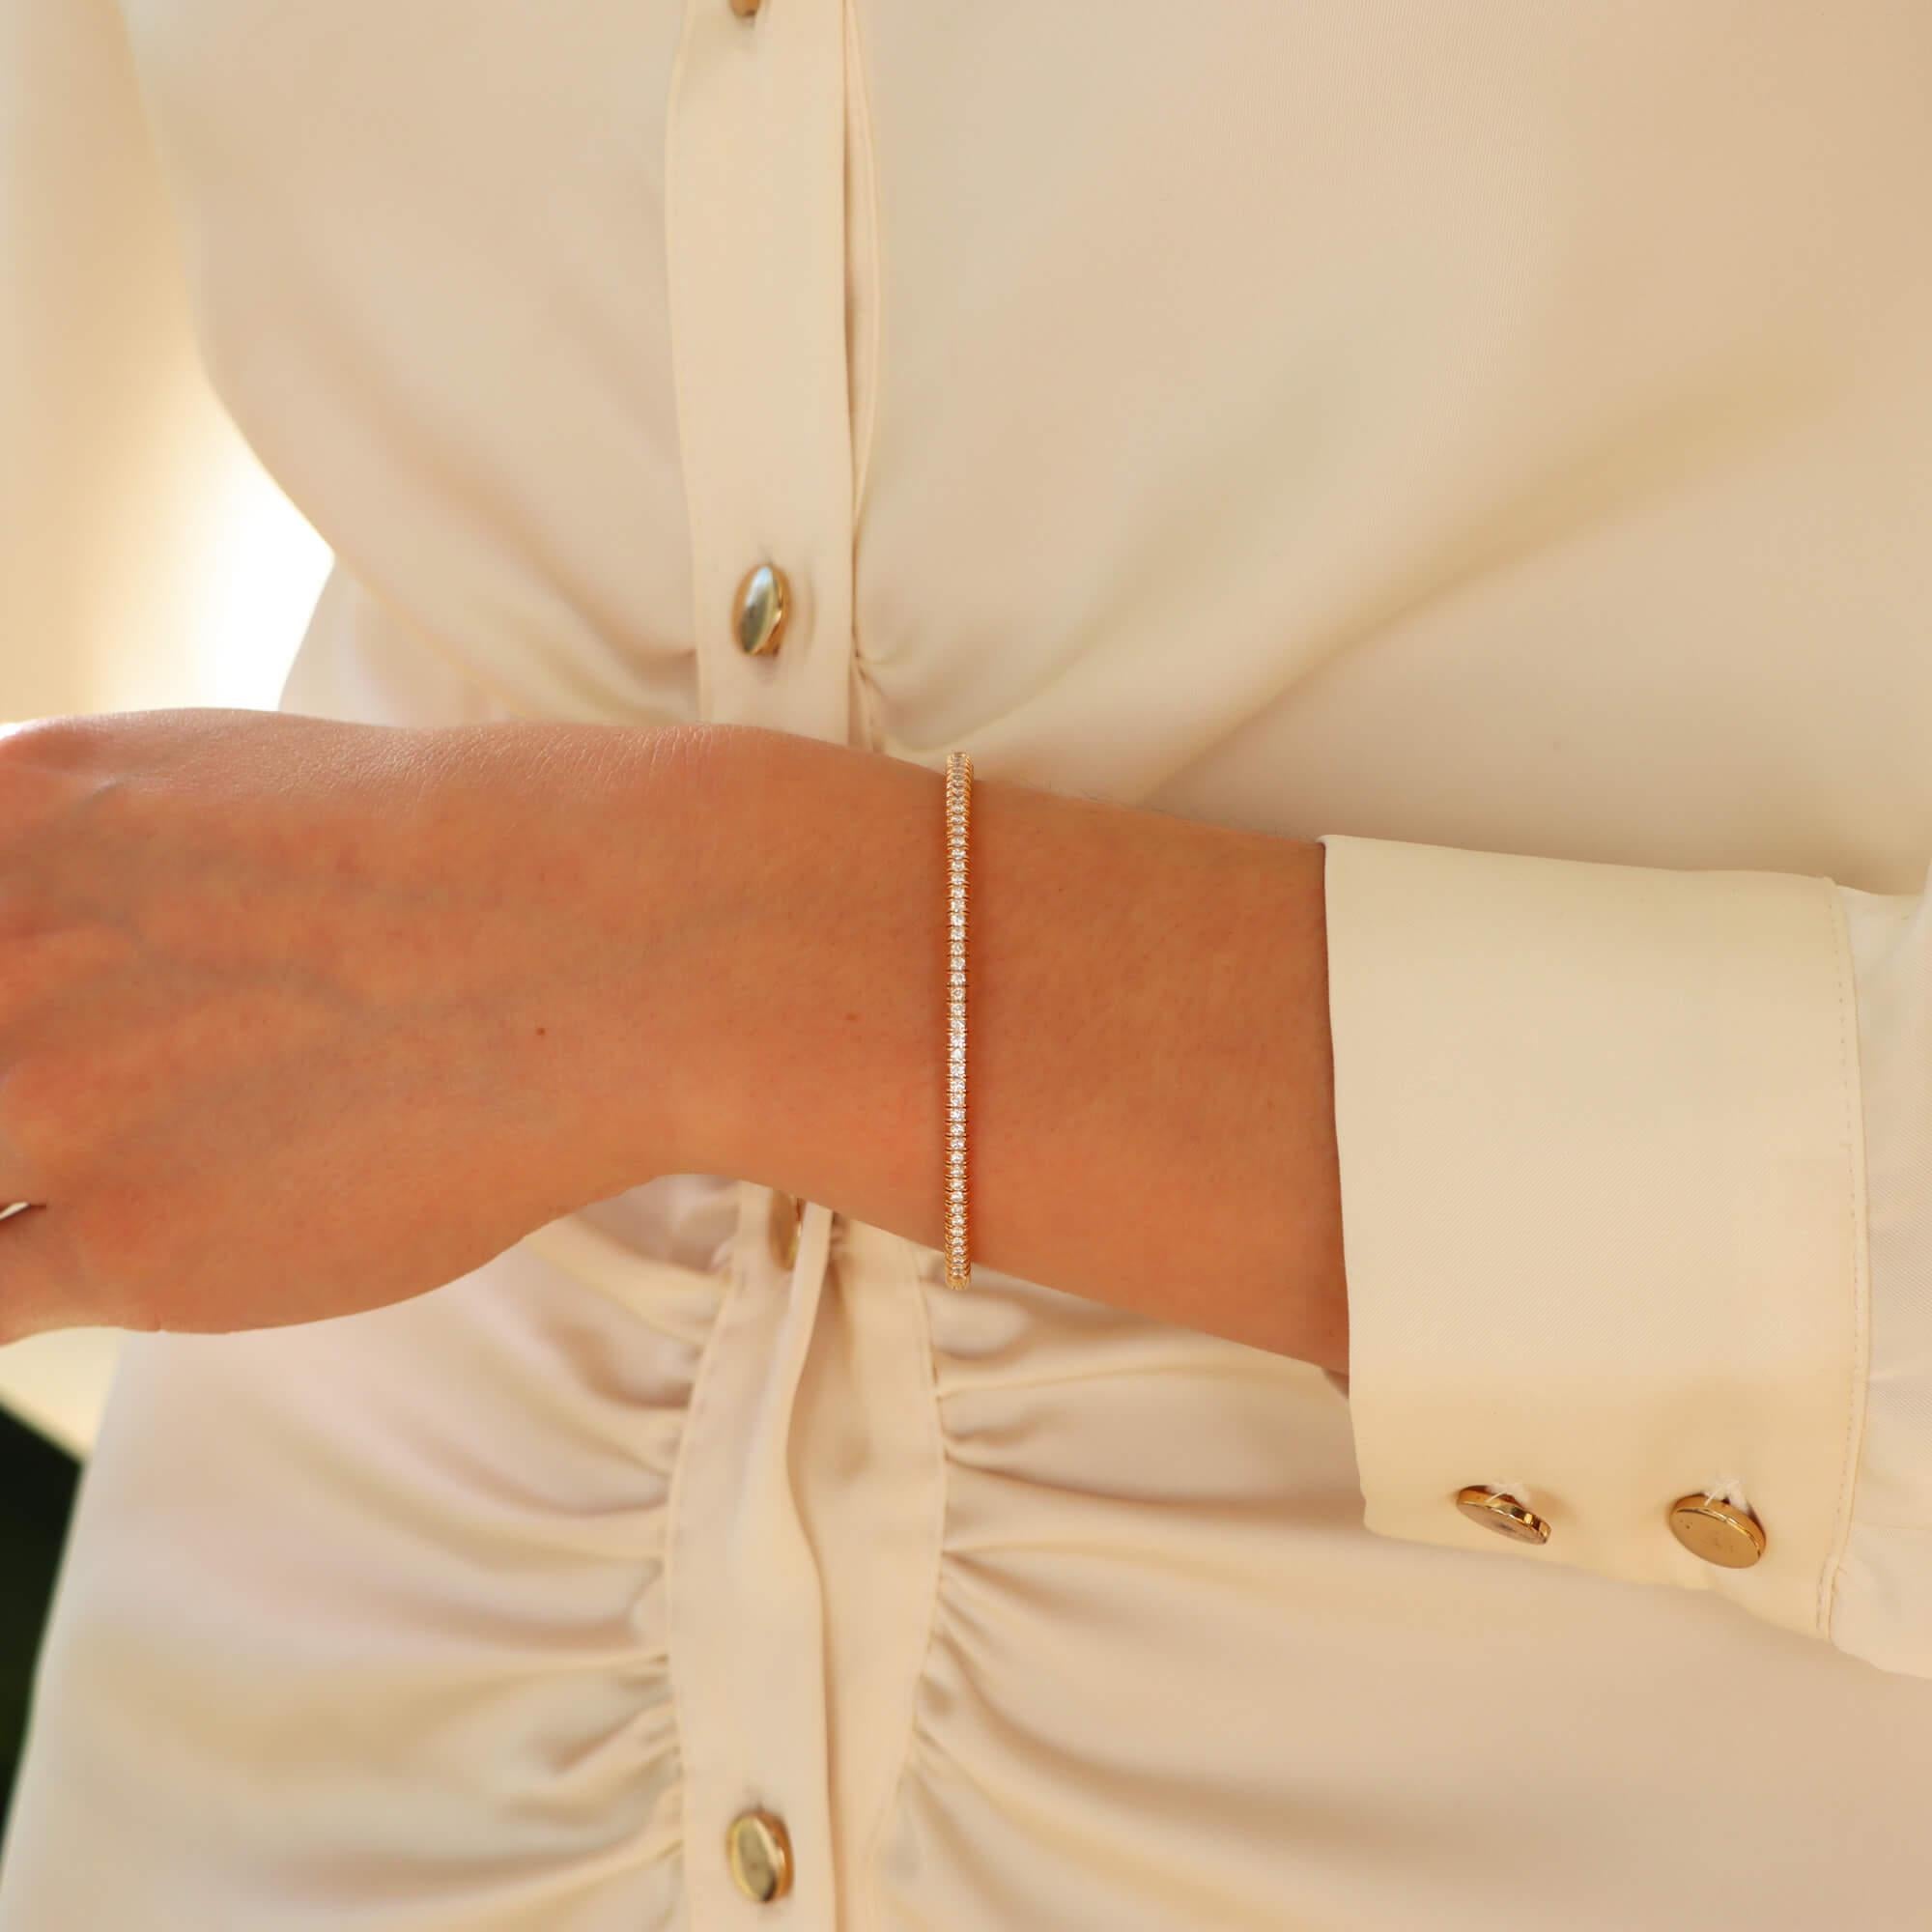 A classic vintage Cartier ‘Etincelle’ diamond hinged bangle set in 18k rose gold.

The piece is composed of a solid 3-millimetre bangle that is hinged to one side with a secure click shut and safety catch fitting. One side of the bangle is fully